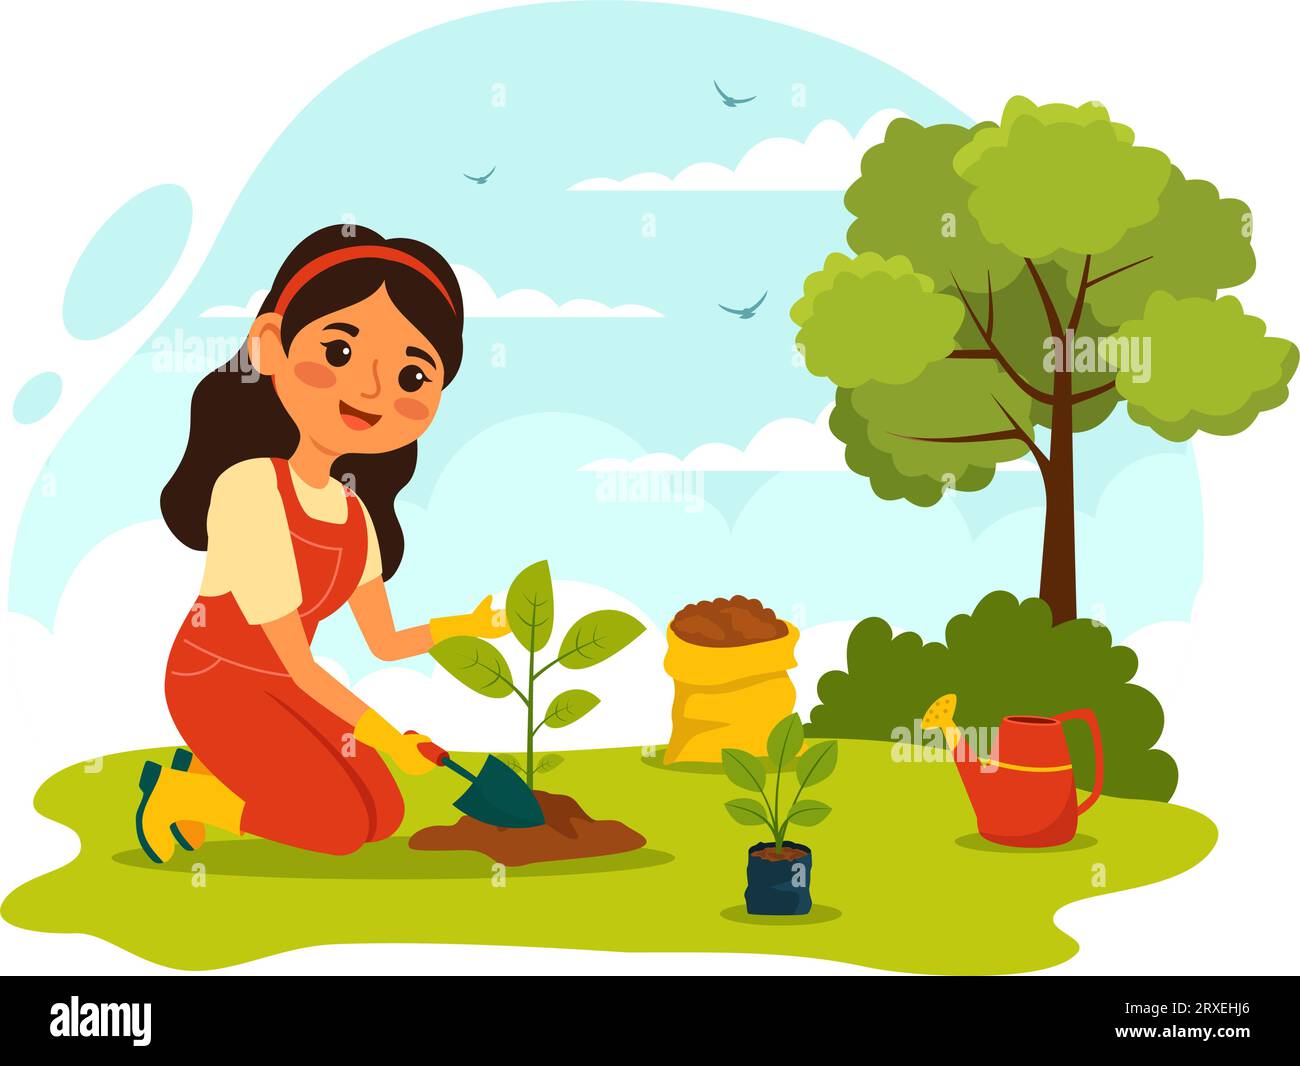 Planting Plants Vector Illustration with People Enjoy Gardening, Plant, Watering or Digging in the Garden in Flat Kids Cartoon Background Design Stock Vector